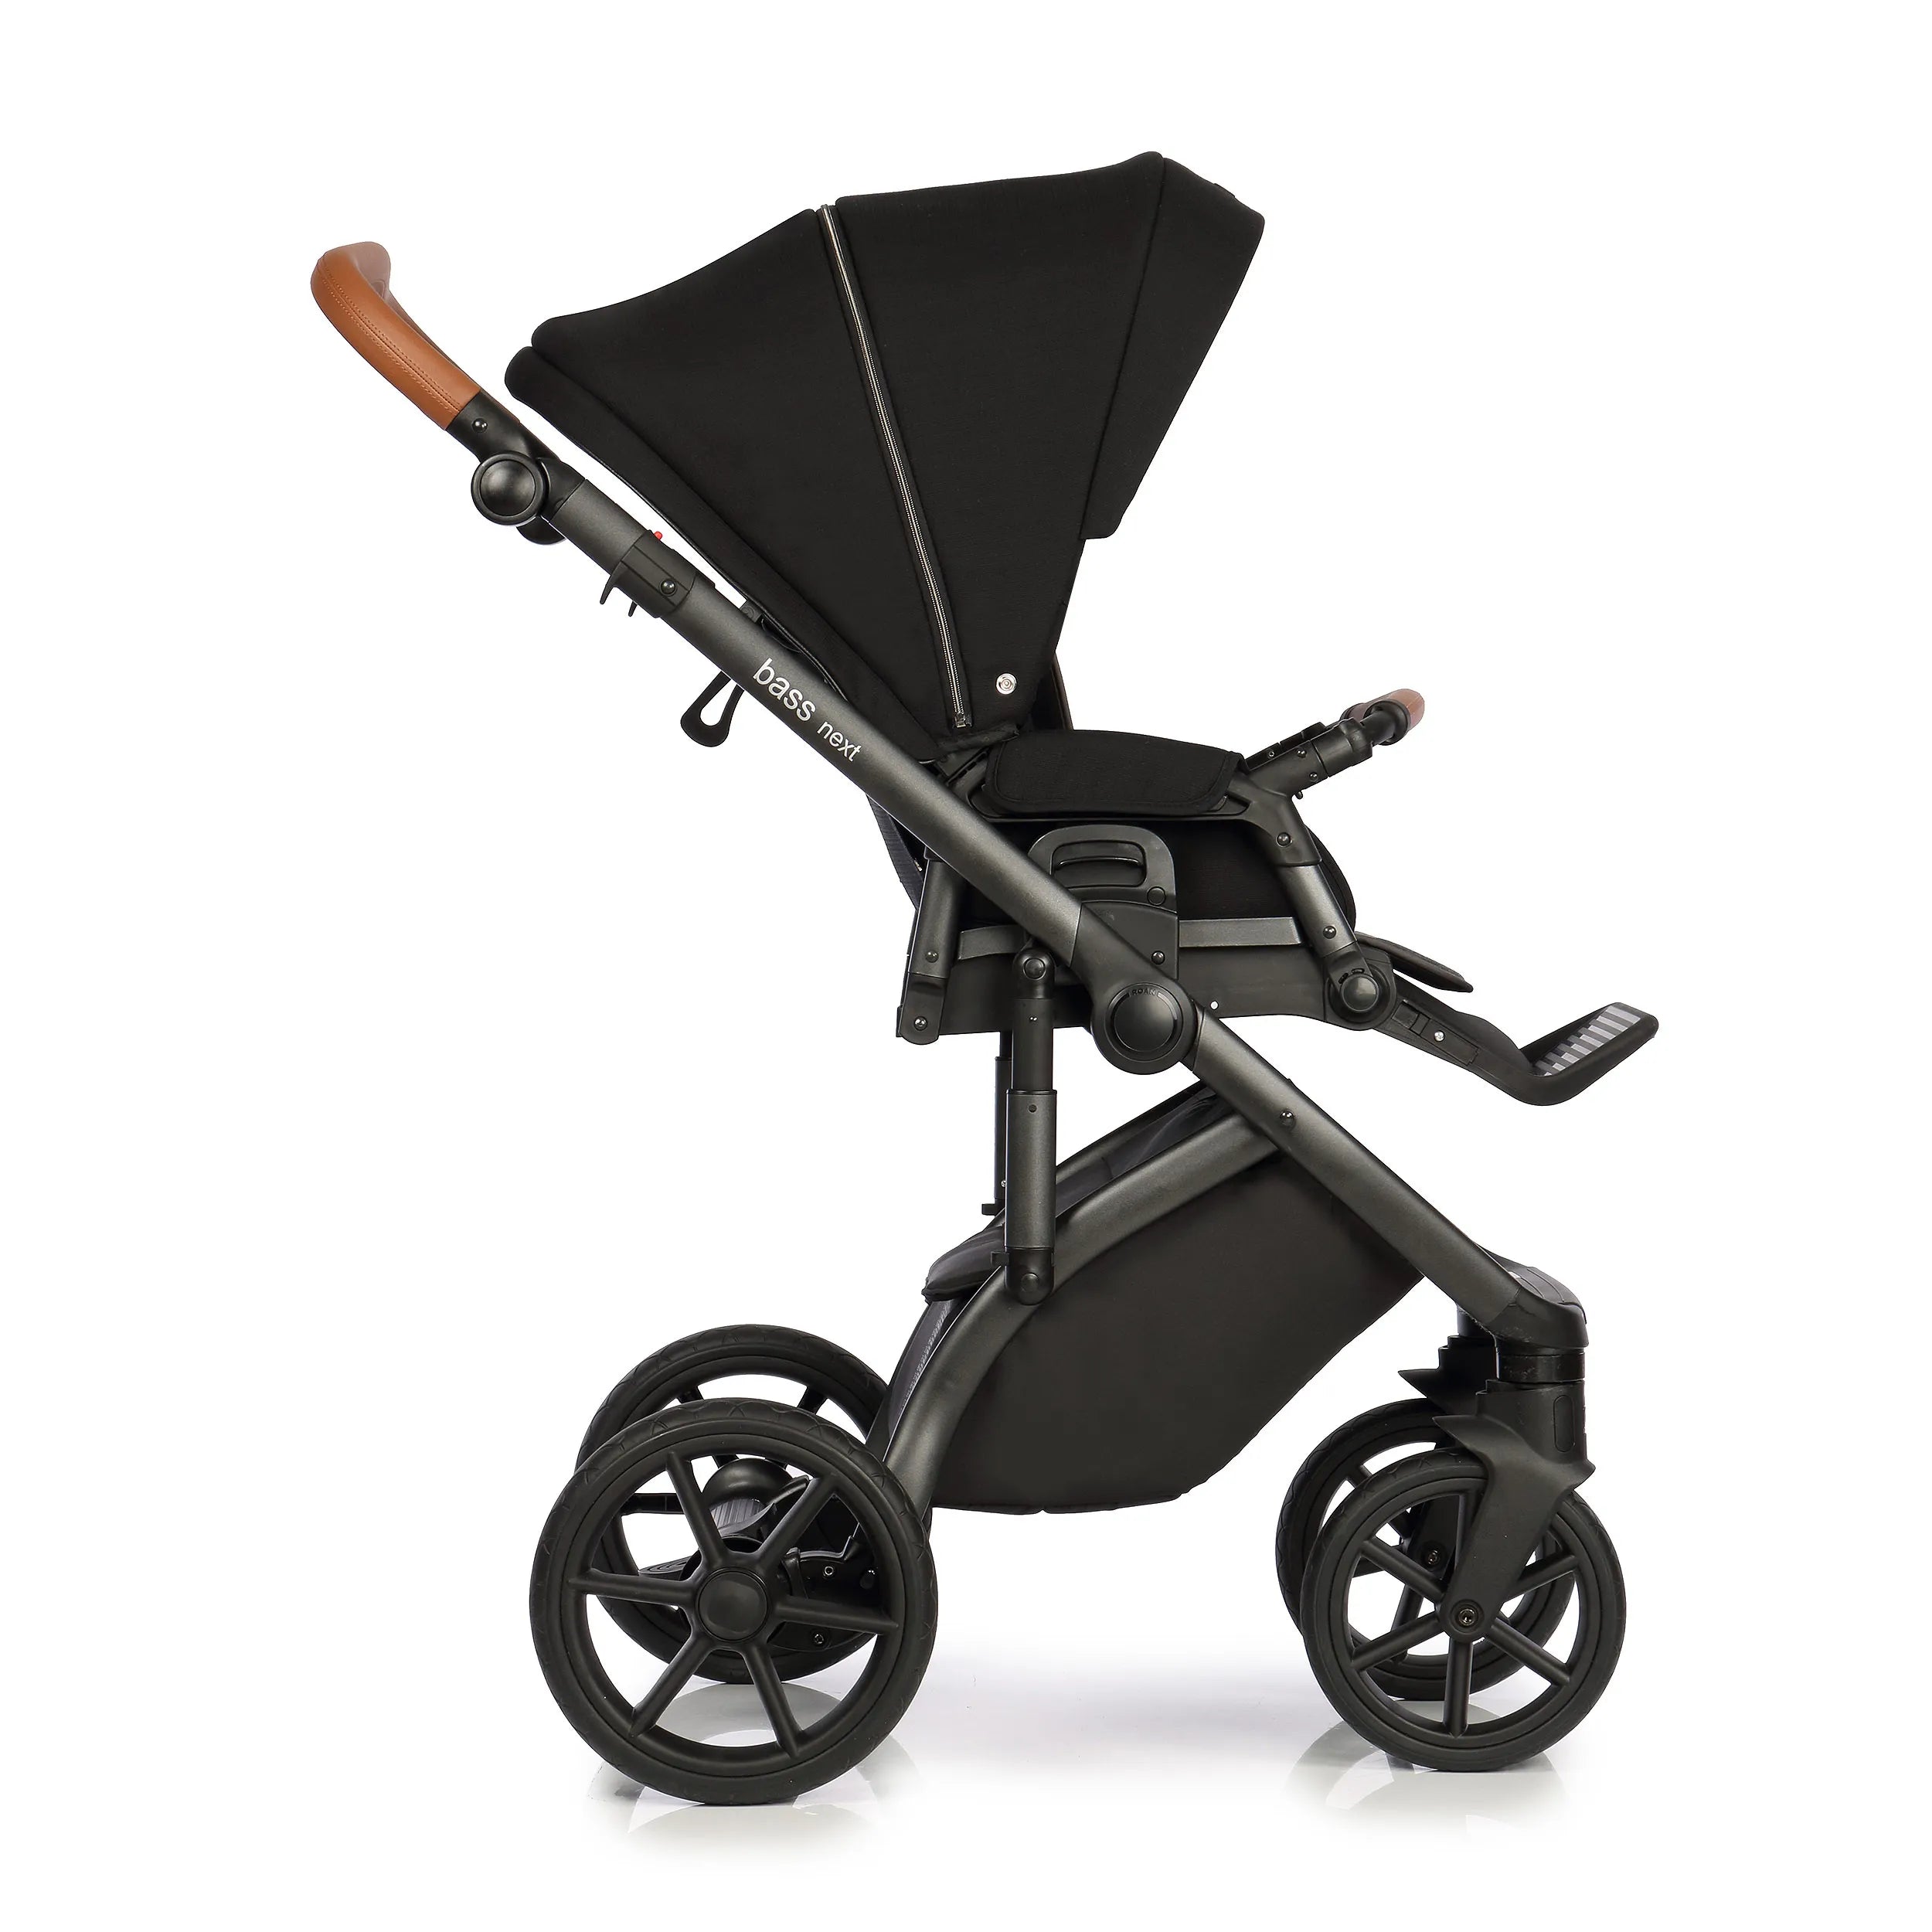 ROAN Bass Next baby stroller, carry cot and stroller 2 in 1, color: Black